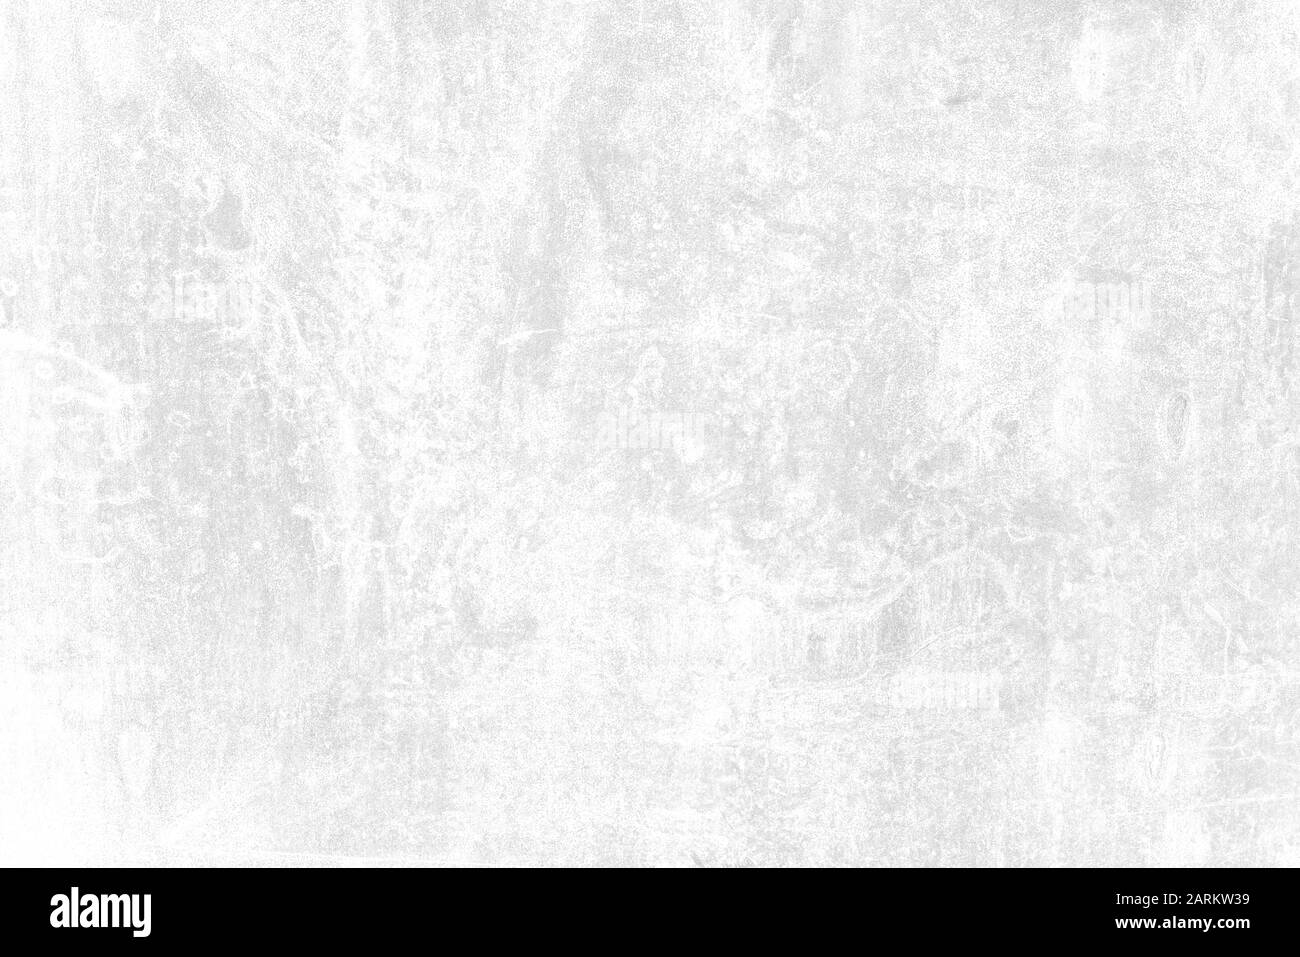 Vintage white background with distressed old grunge texture, old white paper or wall with gray stains and grungy surface Stock Photo